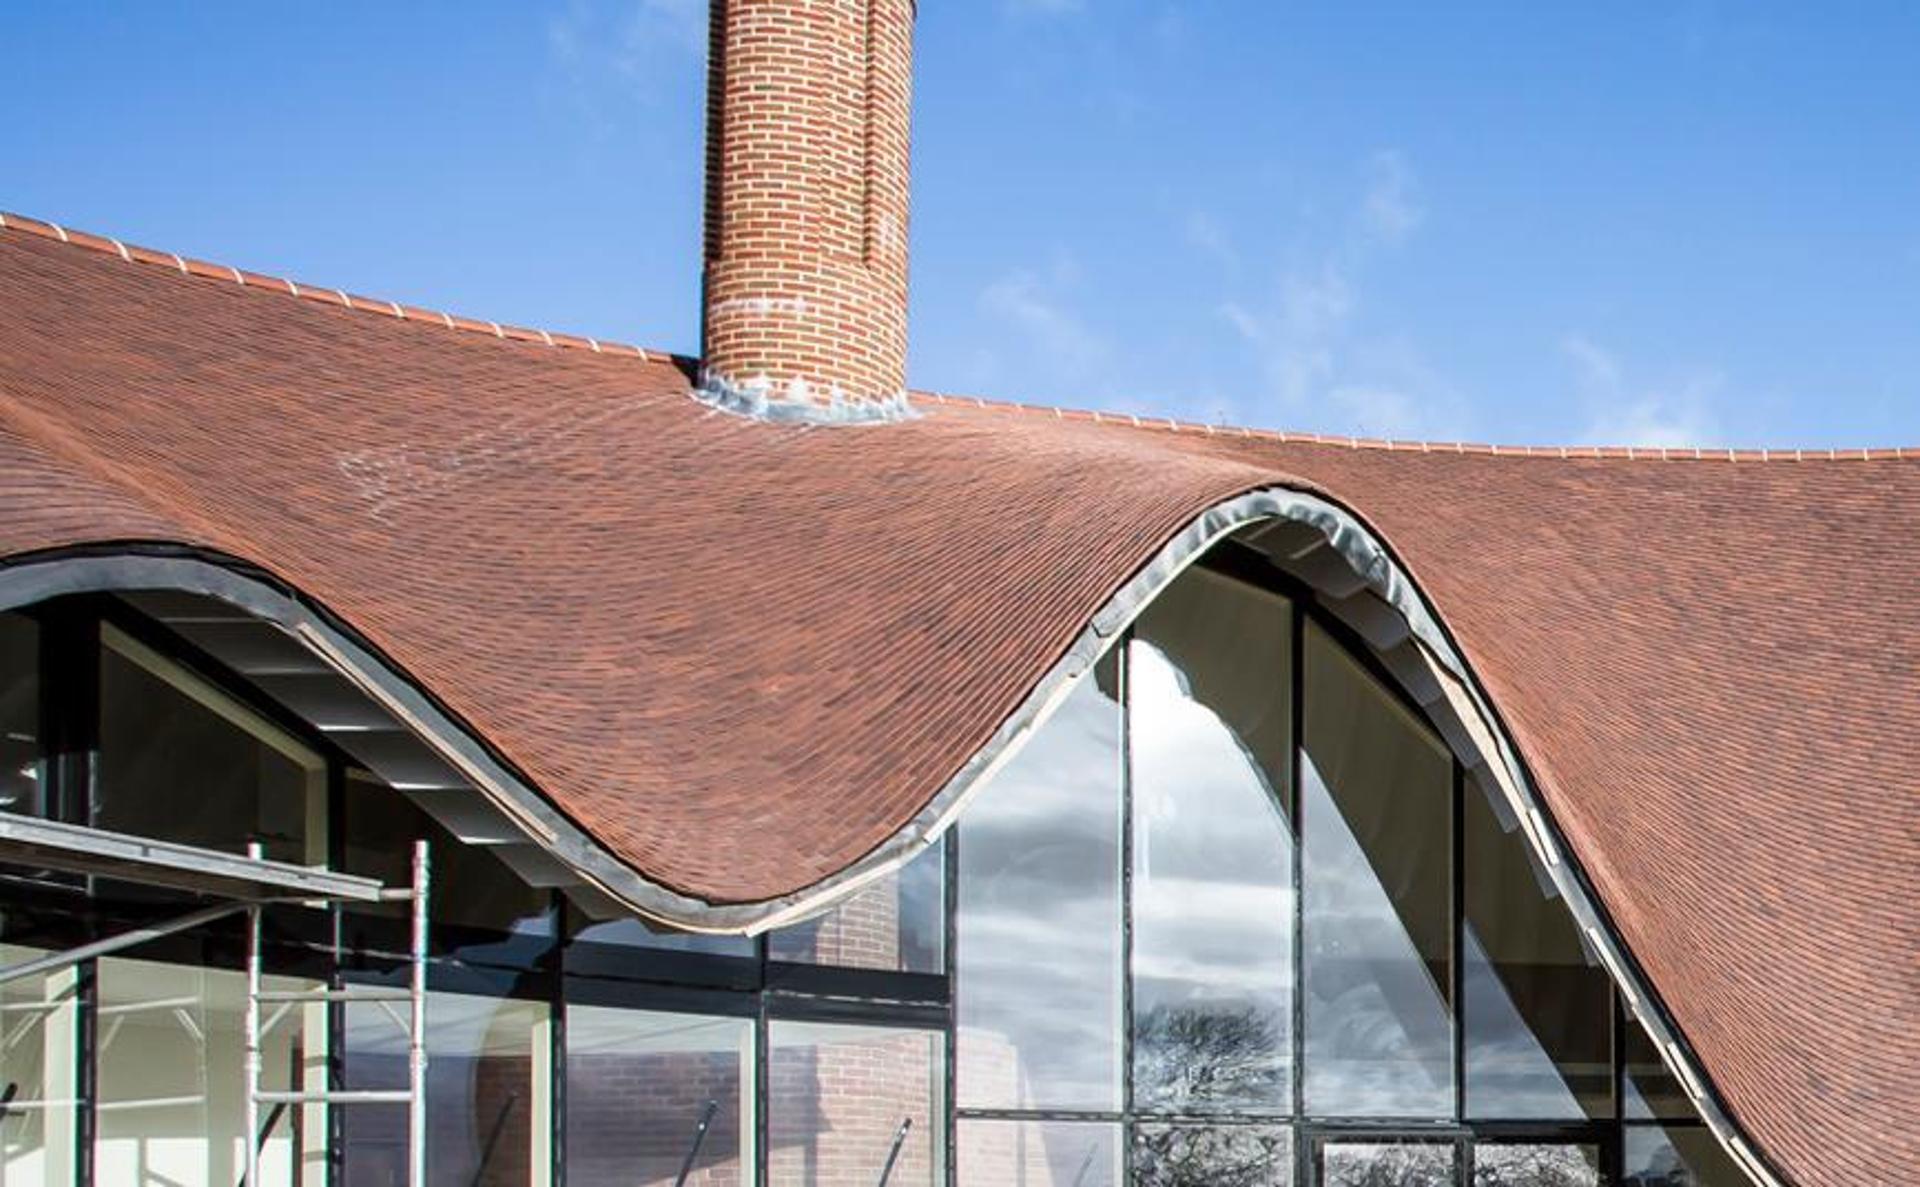 Marshalls acquires roofing manufacturer at 4.5x turnover